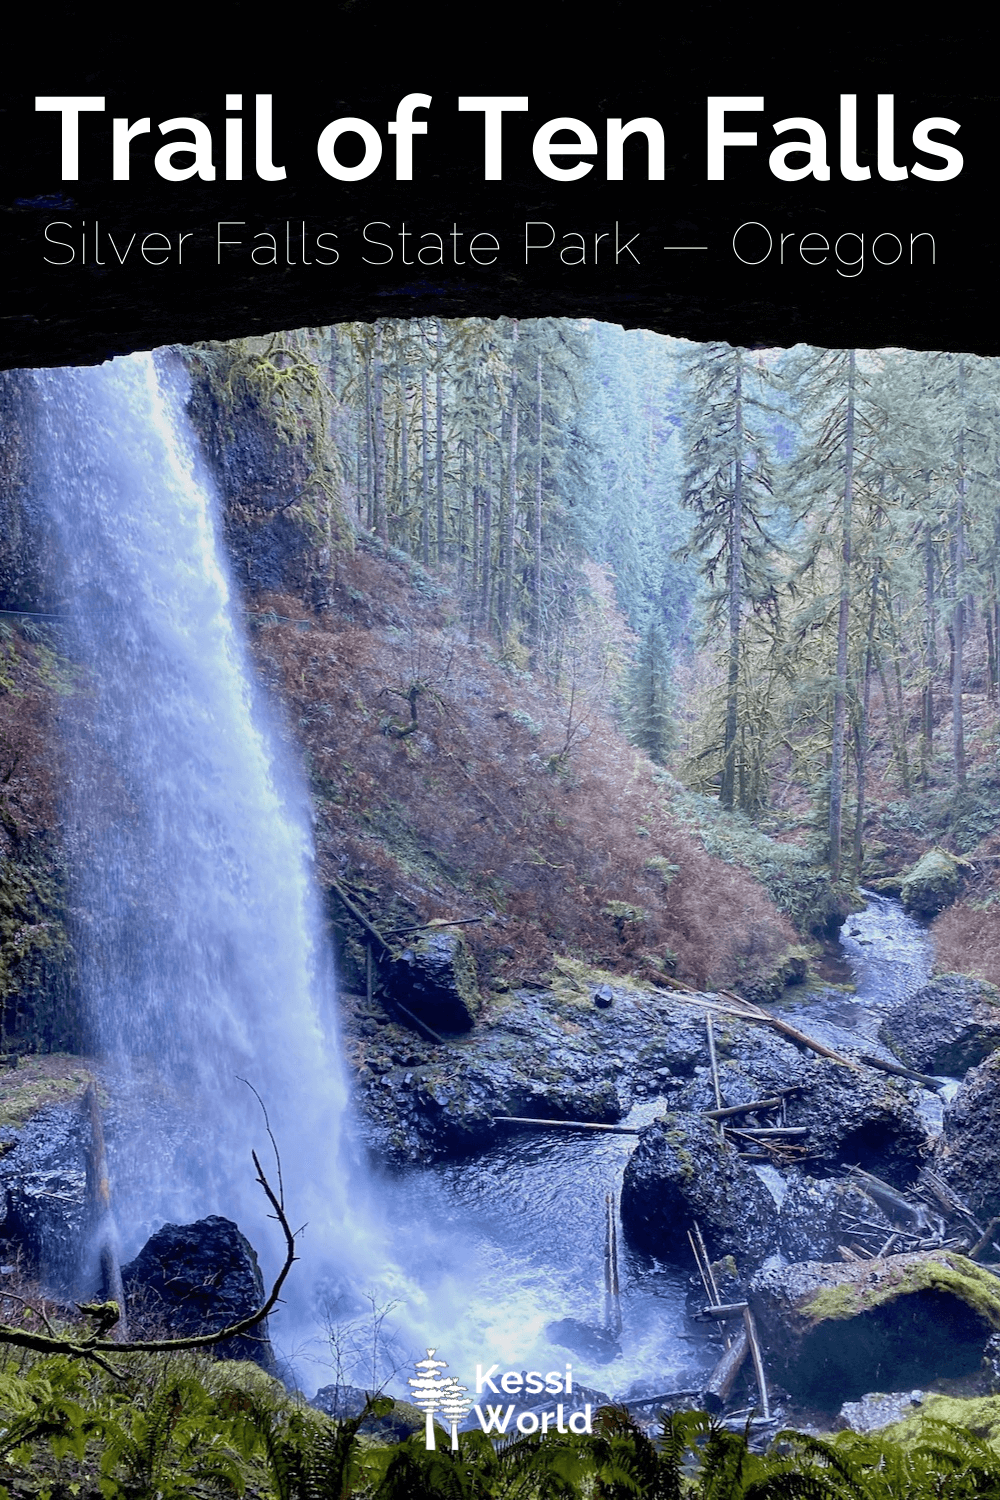 This Pinterest pin showcases stunning North Falls in the Silver Creek Falls Trail of Ten Falls from the viewpoint inside the cave behind the waterfall, looking outward toward a Winter forest scene, with evergreen trees mixed with leafless maples.  The dark roof of the cave is in contract to the water gushing down from above and the green ferns growing around the splash zone as mist rises up and covers giant lava rocks with tree trunks strewn about.  